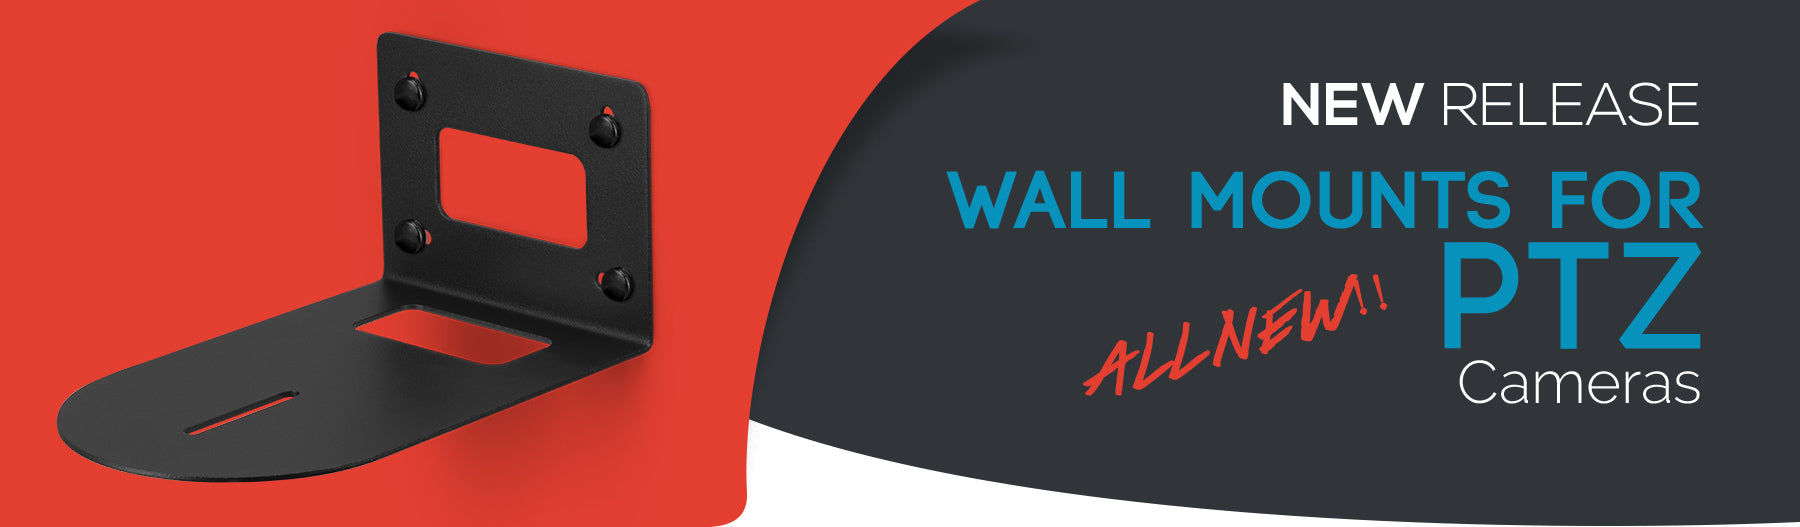 All New All Metal PTZ Wall Mounts